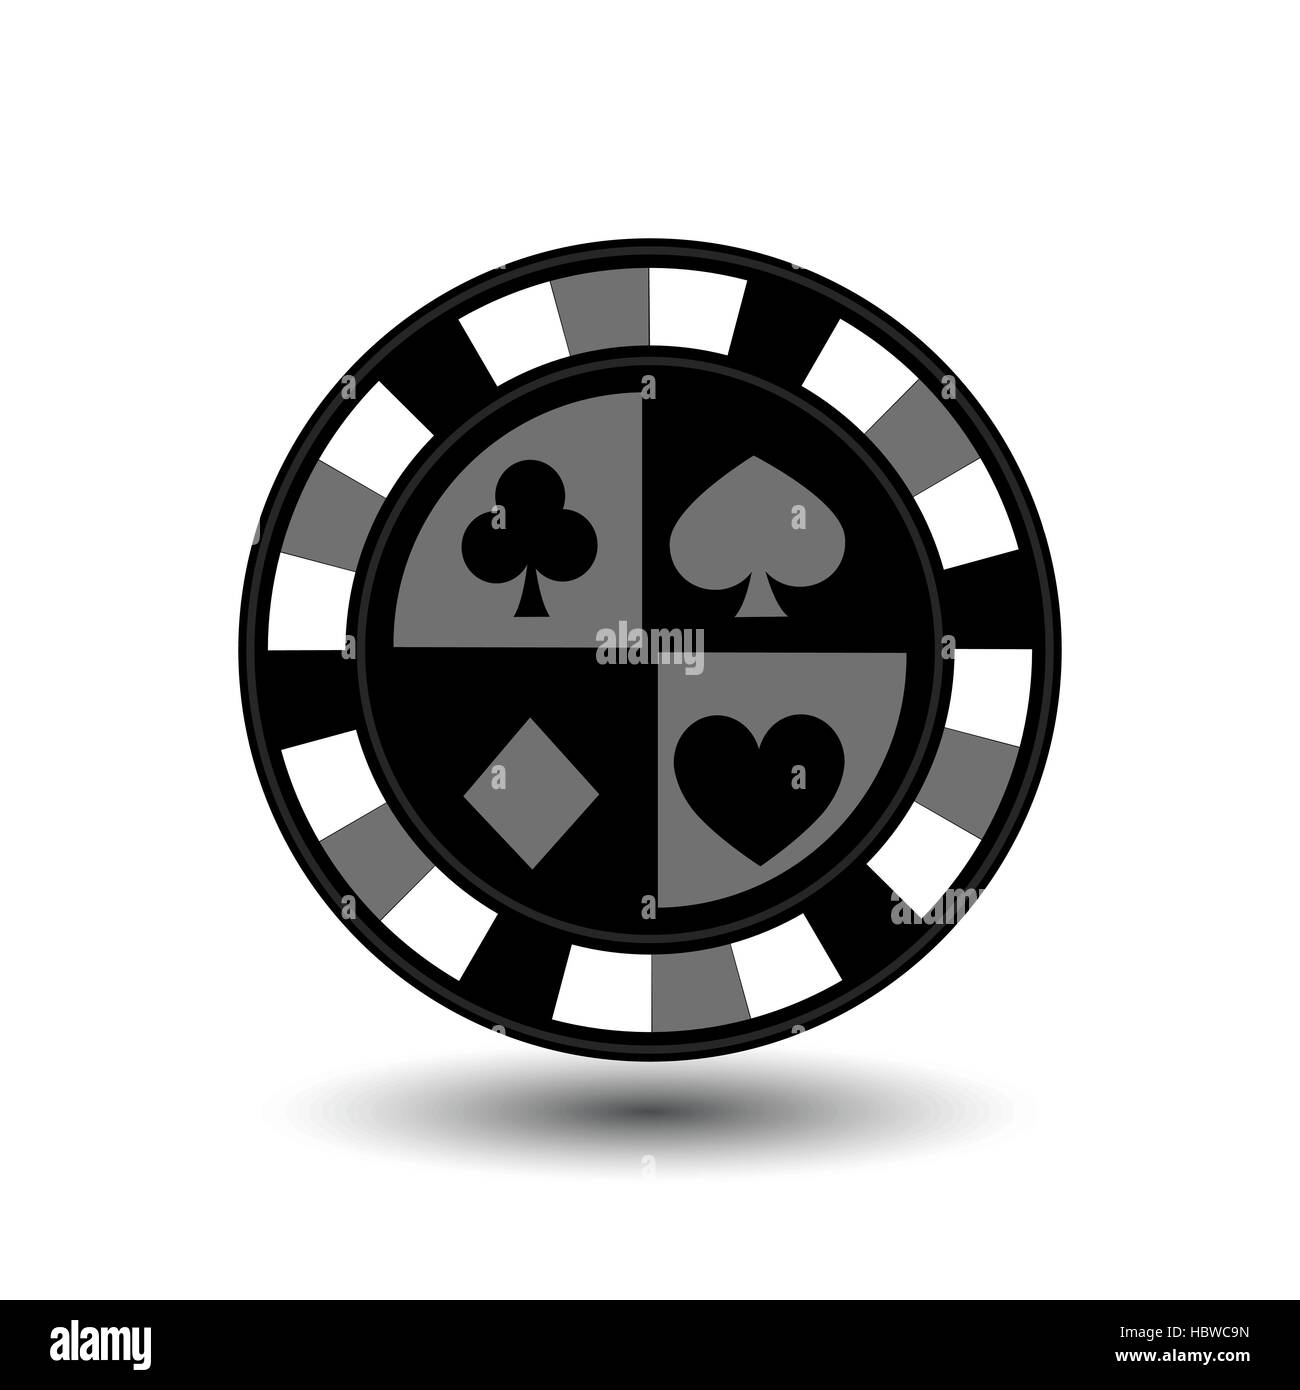 chips for poker grey a suit spade heart club diamond an icon on the white isolated background. illustration eps 10 vector. To use for the websites, de Stock Vector